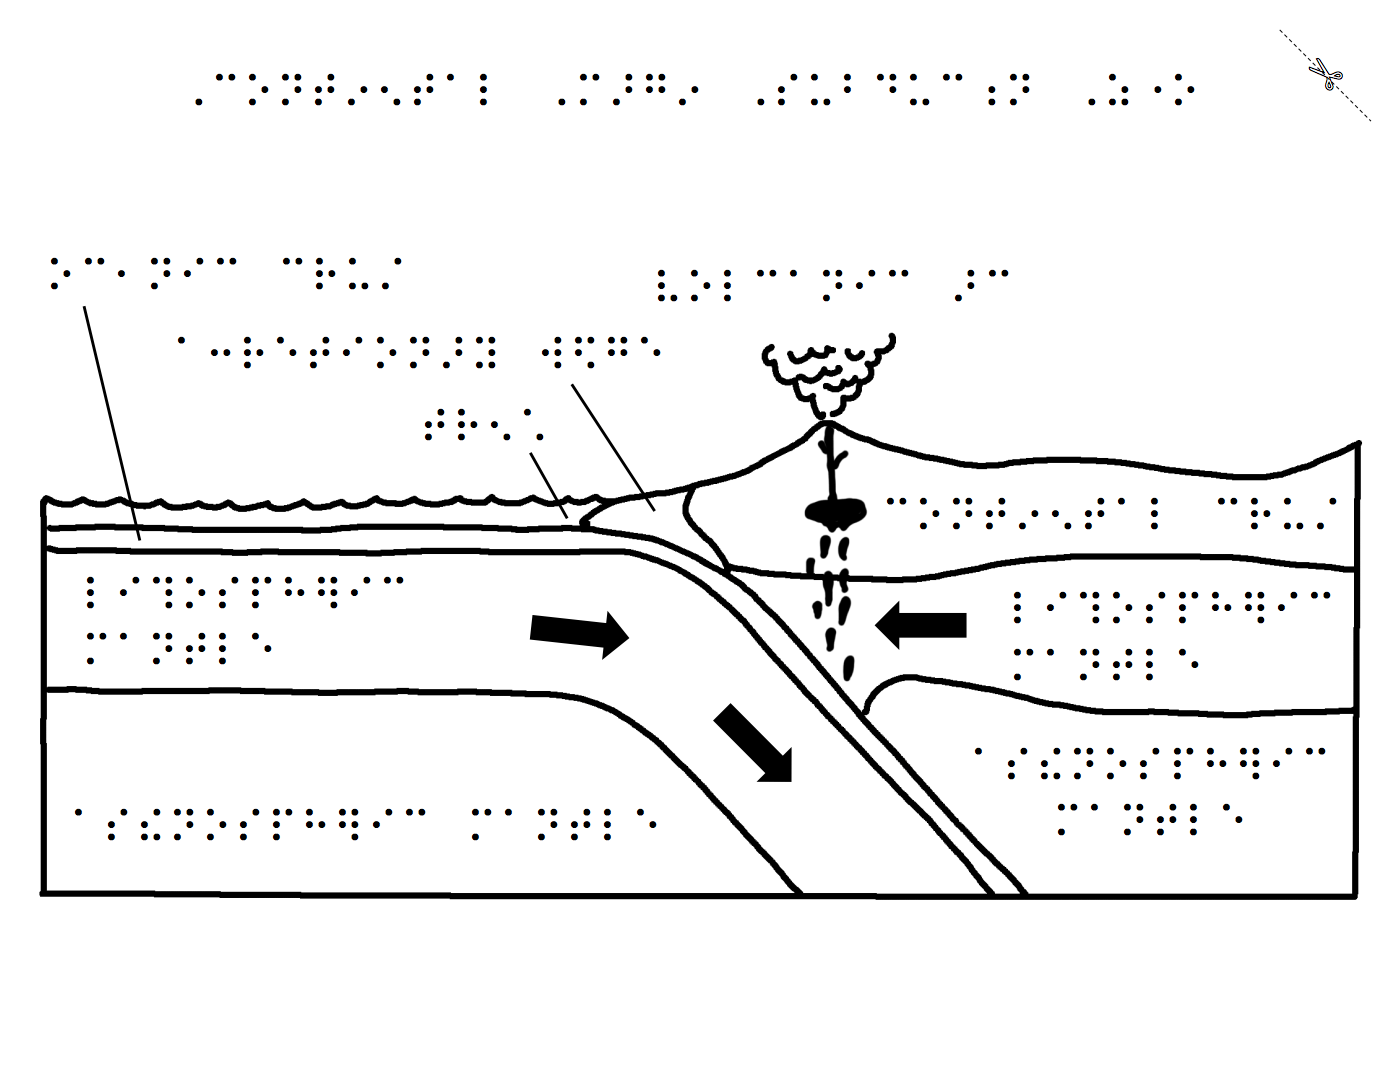 Graphic with accompanying text and labels in Grade 2 (contracted) 24 point Braille